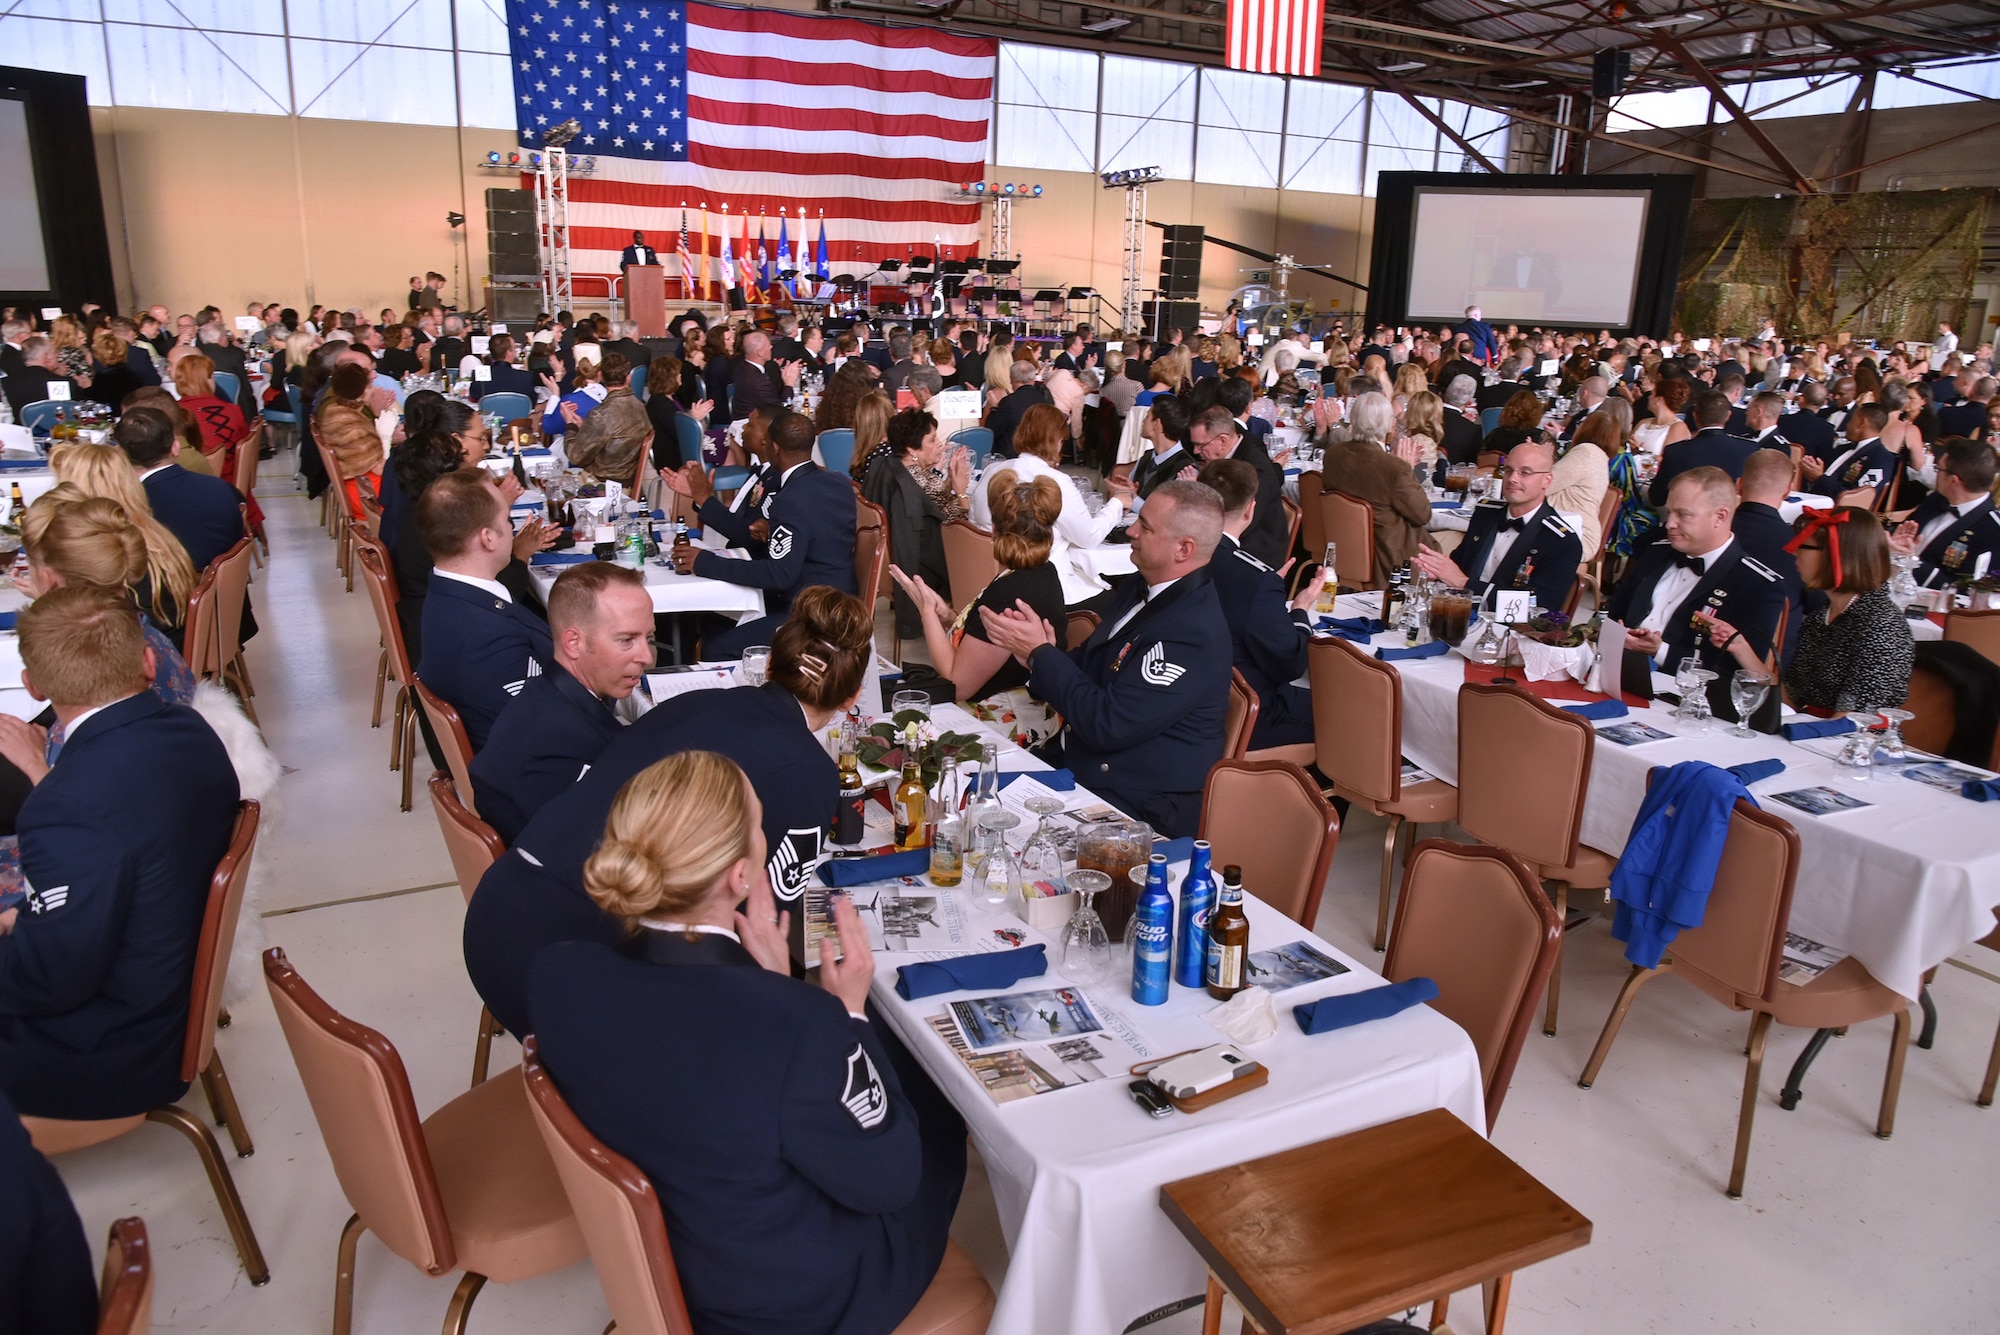 About 500 people attended Kirtland's anniversary banquet at the New Mexico Air National Guard’s 150th Special Operations Wing hangar April 16. The banquet had a 1940s theme, to remember the opening of Albuquerque Army Air Base on Jan. 7, 1941. Period attire and static displays of World War II vehicles helped bring the theme to life. (Photo by Ken Moore)